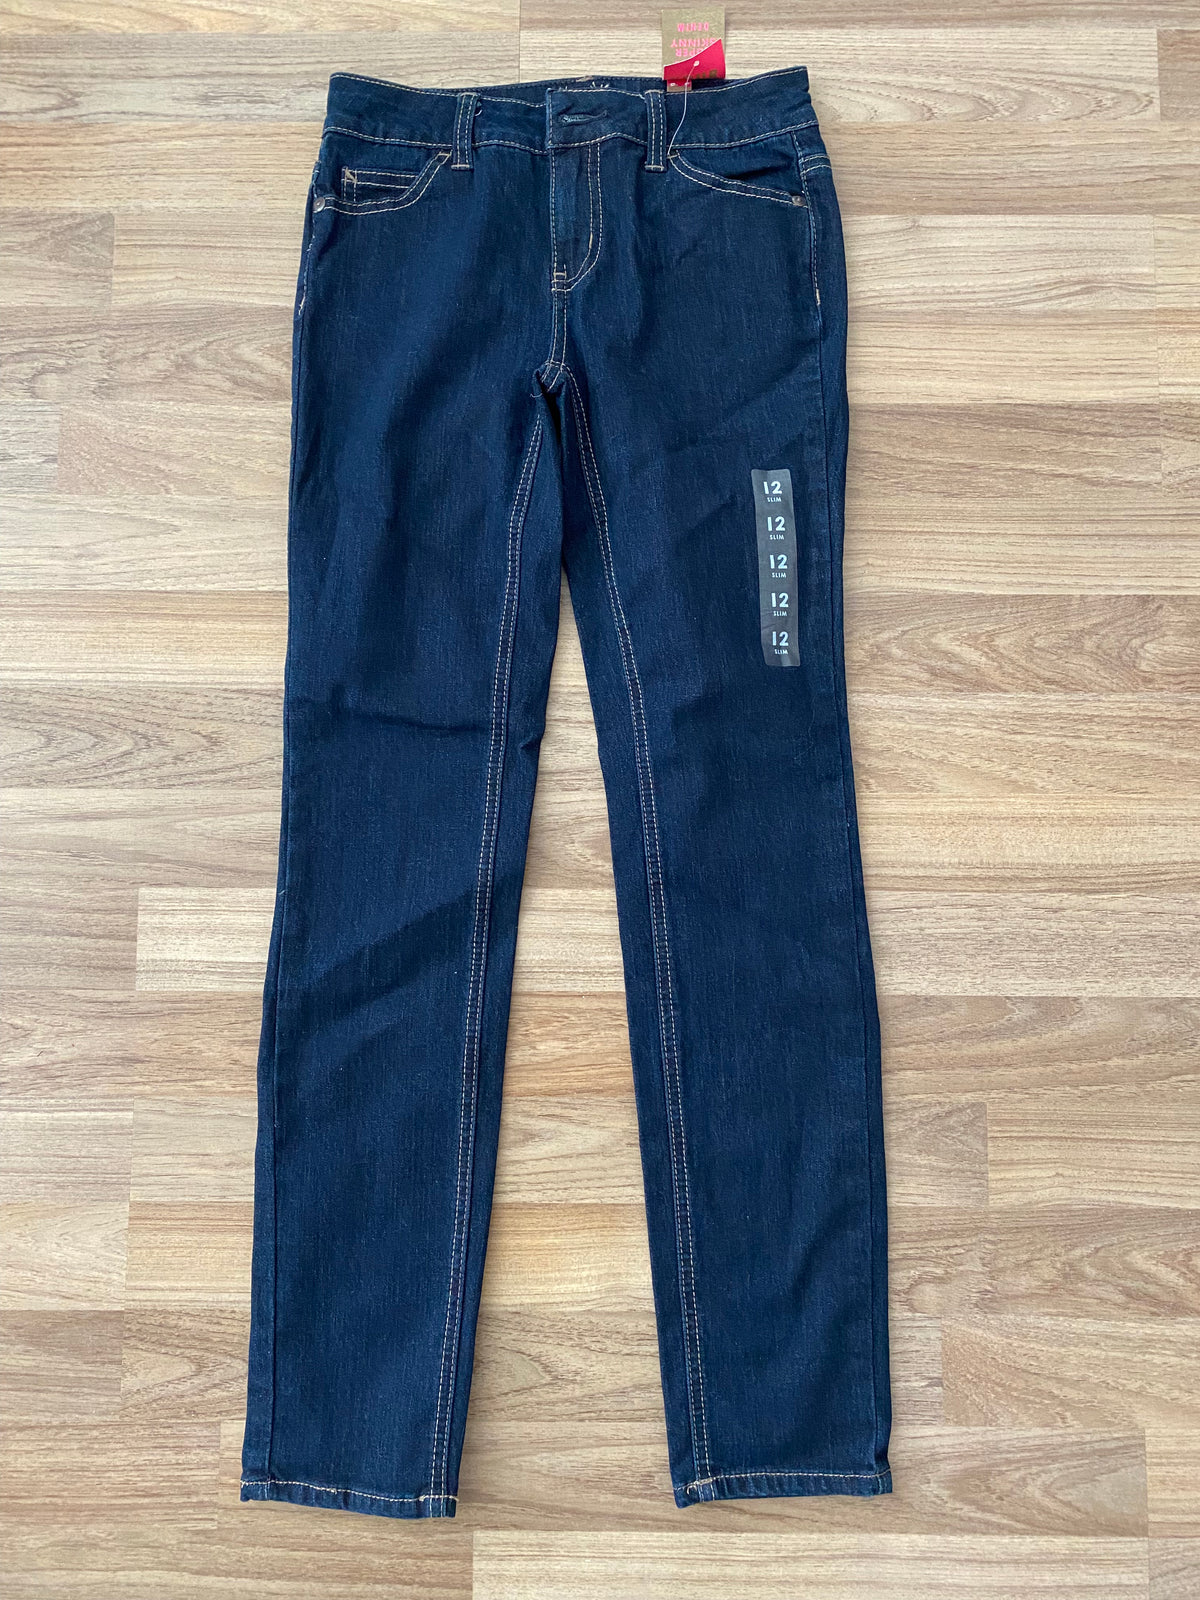 Jeans (Girls Size 12)